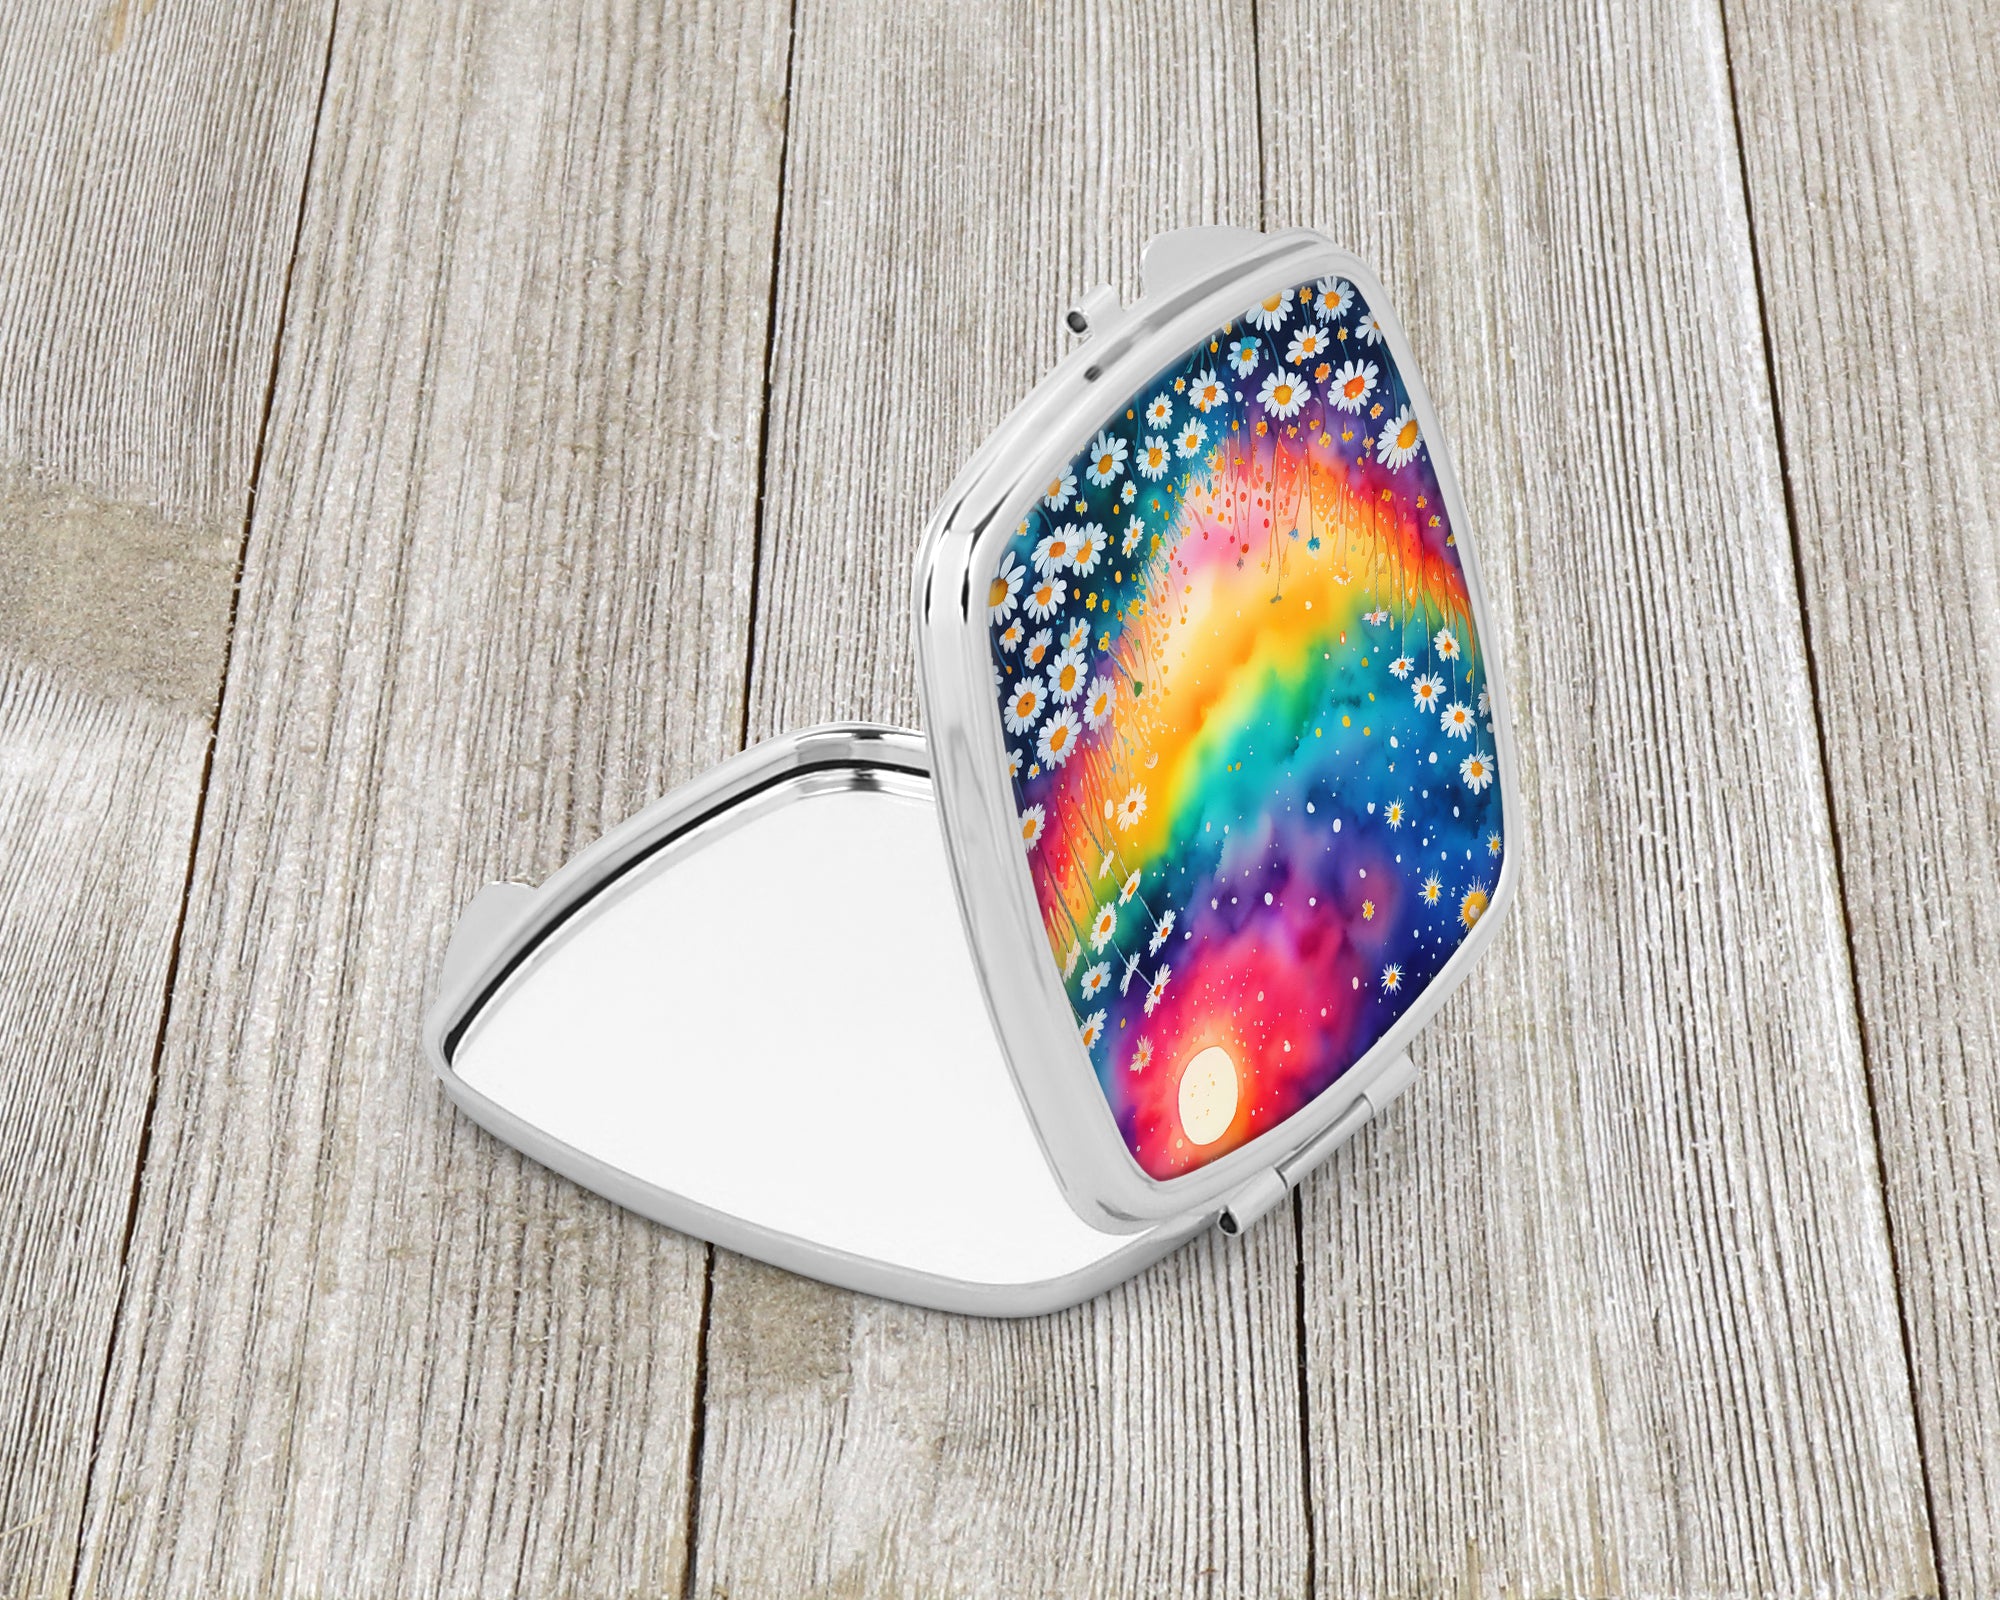 Buy this Colorful Daisies Compact Mirror